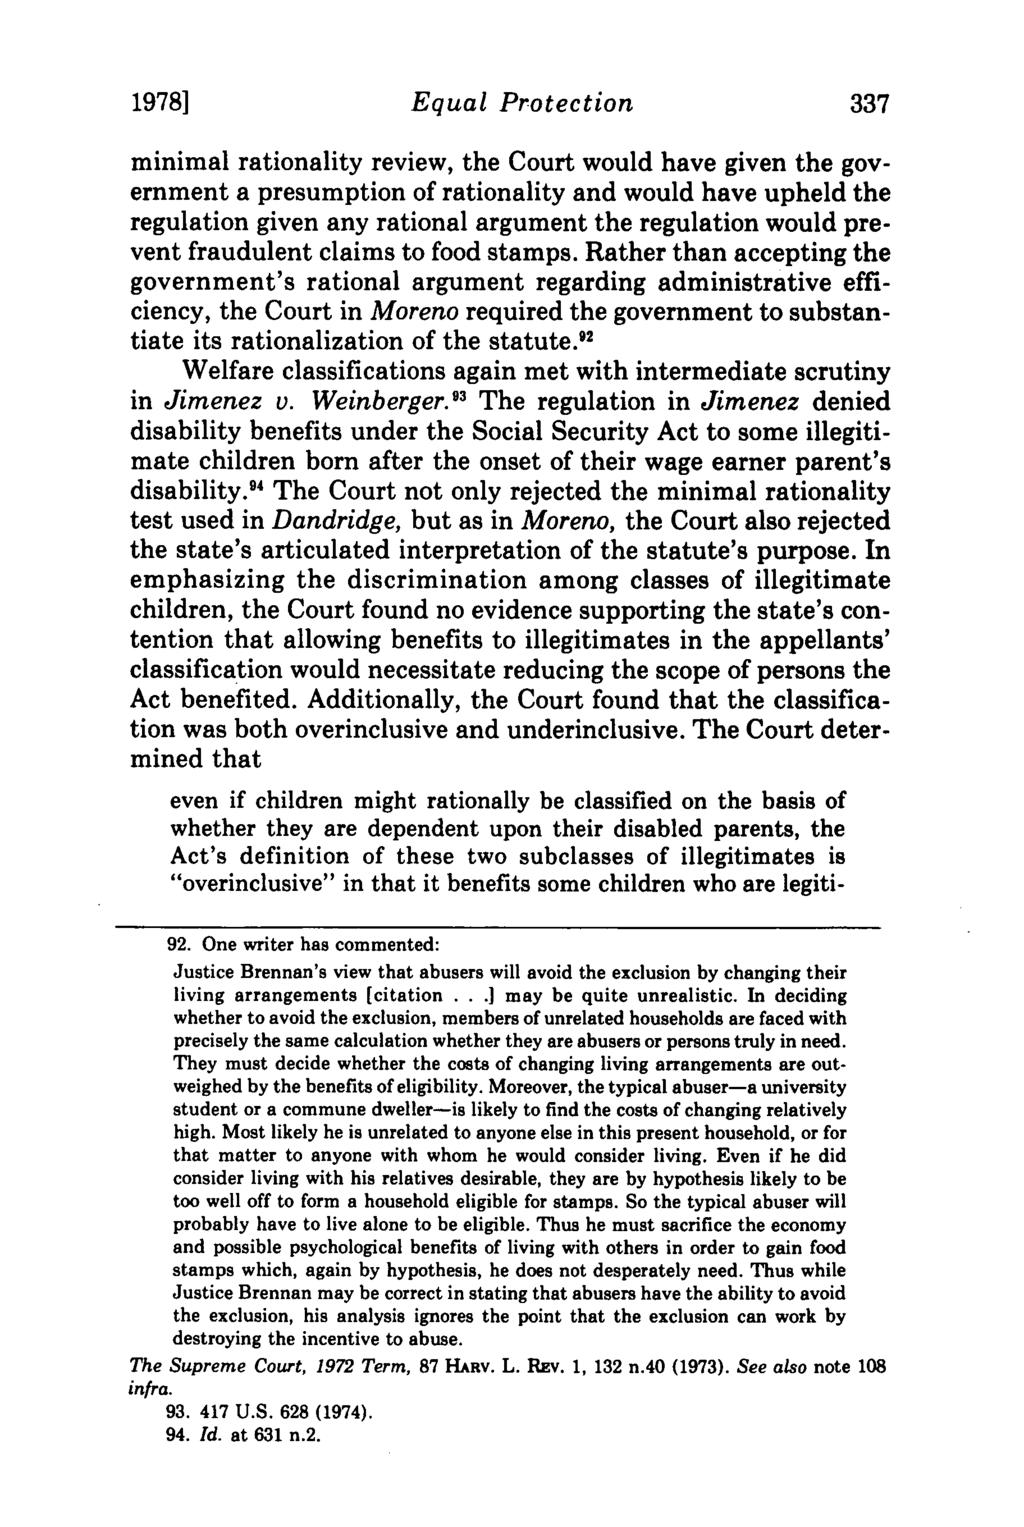 19781 Equal Protection minimal rationality review, the Court would have given the government a presumption of rationality and would have upheld the regulation given any rational argument the